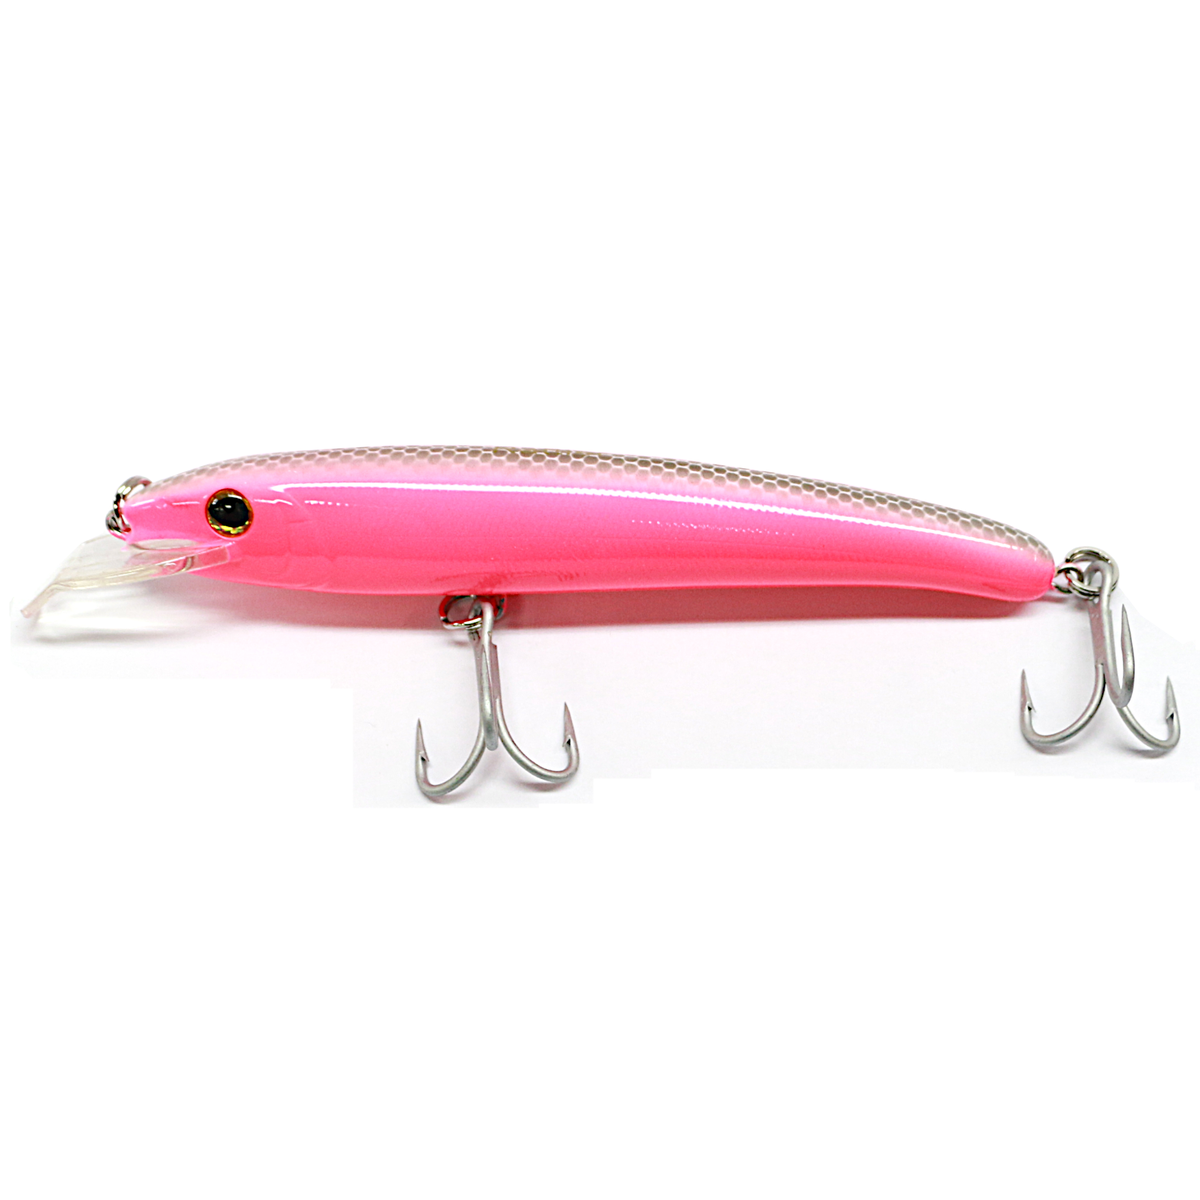 Rattler Lipped Trolling Lure 15cm Colour Pink J308, Shop Today. Get it  Tomorrow!